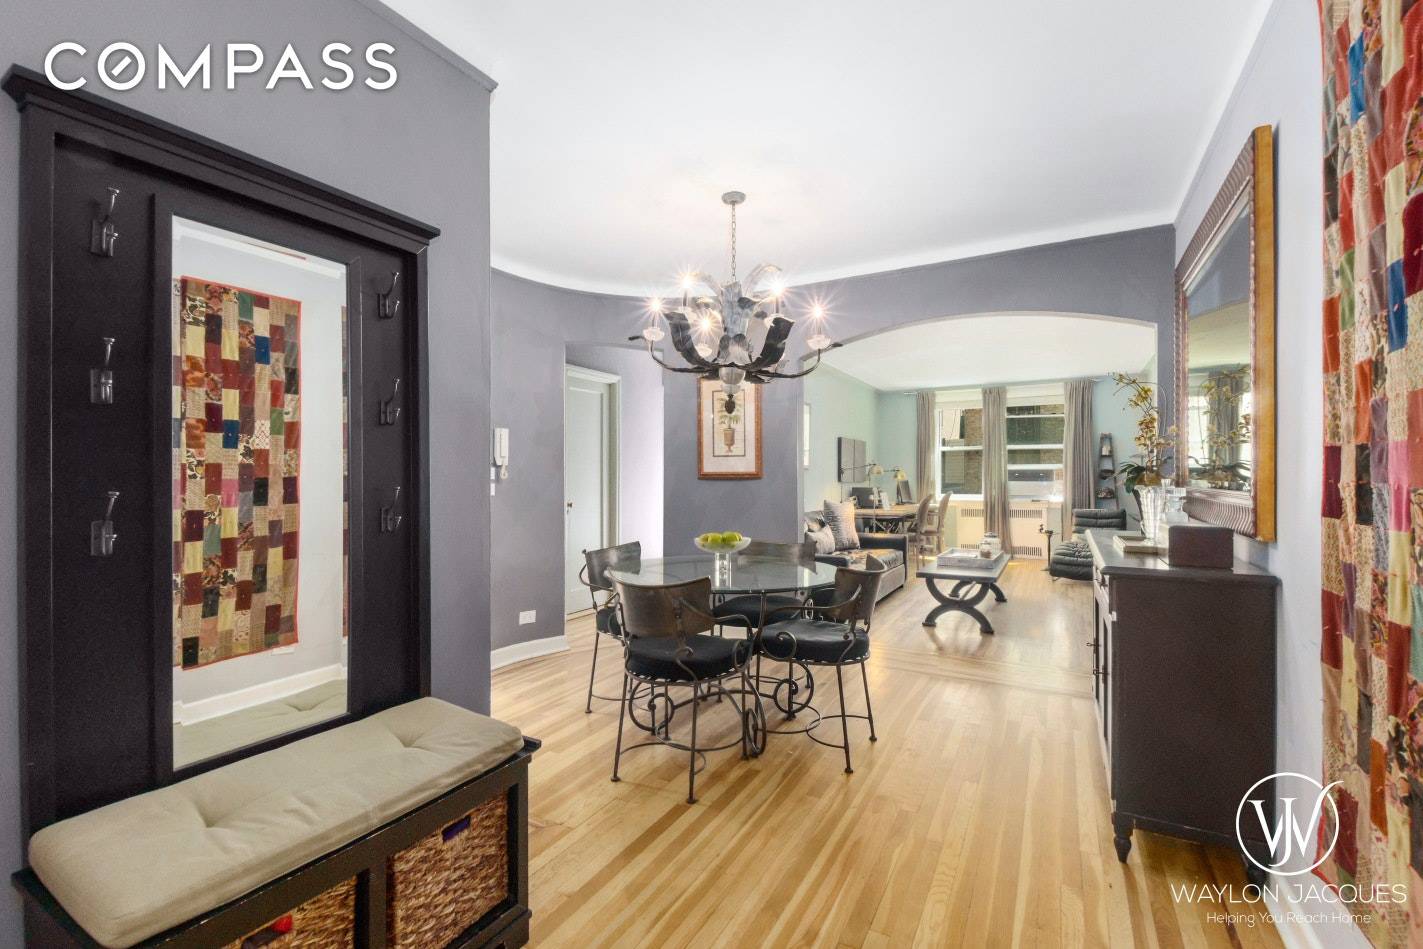 Nested on the rear corner of 310 West 55th Street, this extremely spacious one bedroom boasts a fully gut renovated kitchen and bathroom, large arched doorways, refinished hardwood floors, TONS ...